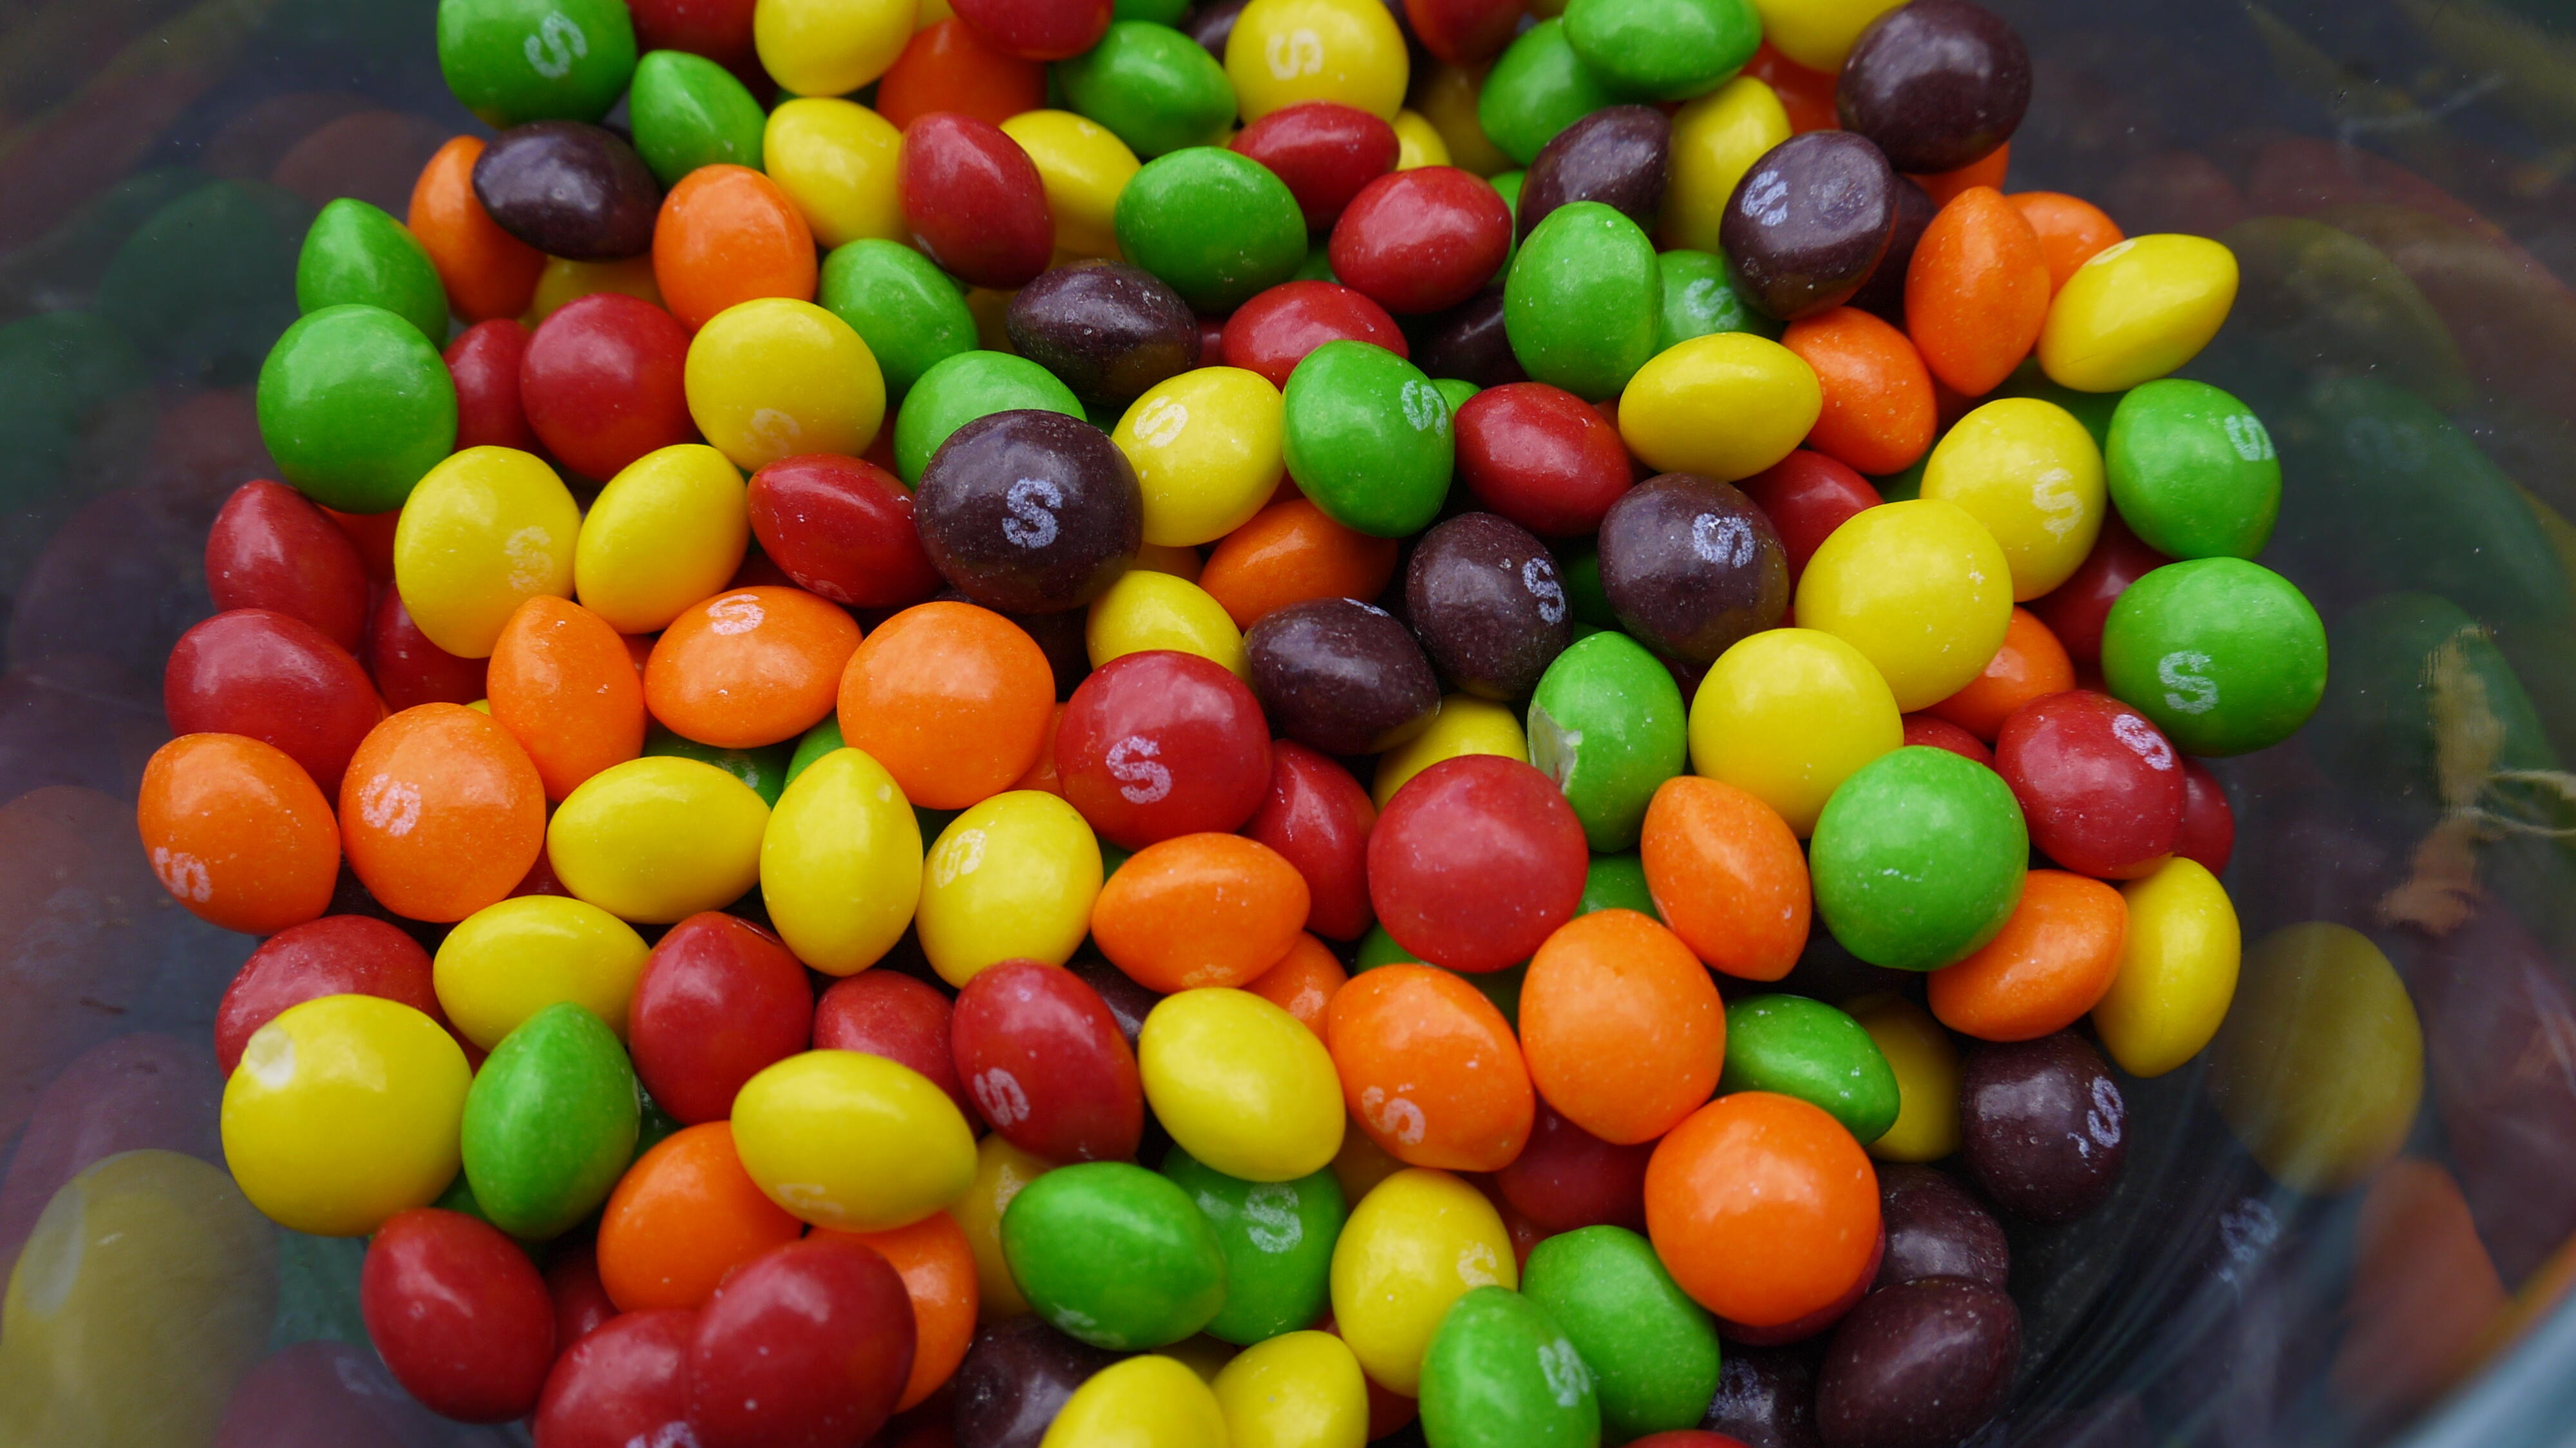 skittles-to-release-new-limited-edition-flavors-for-summer-iheart